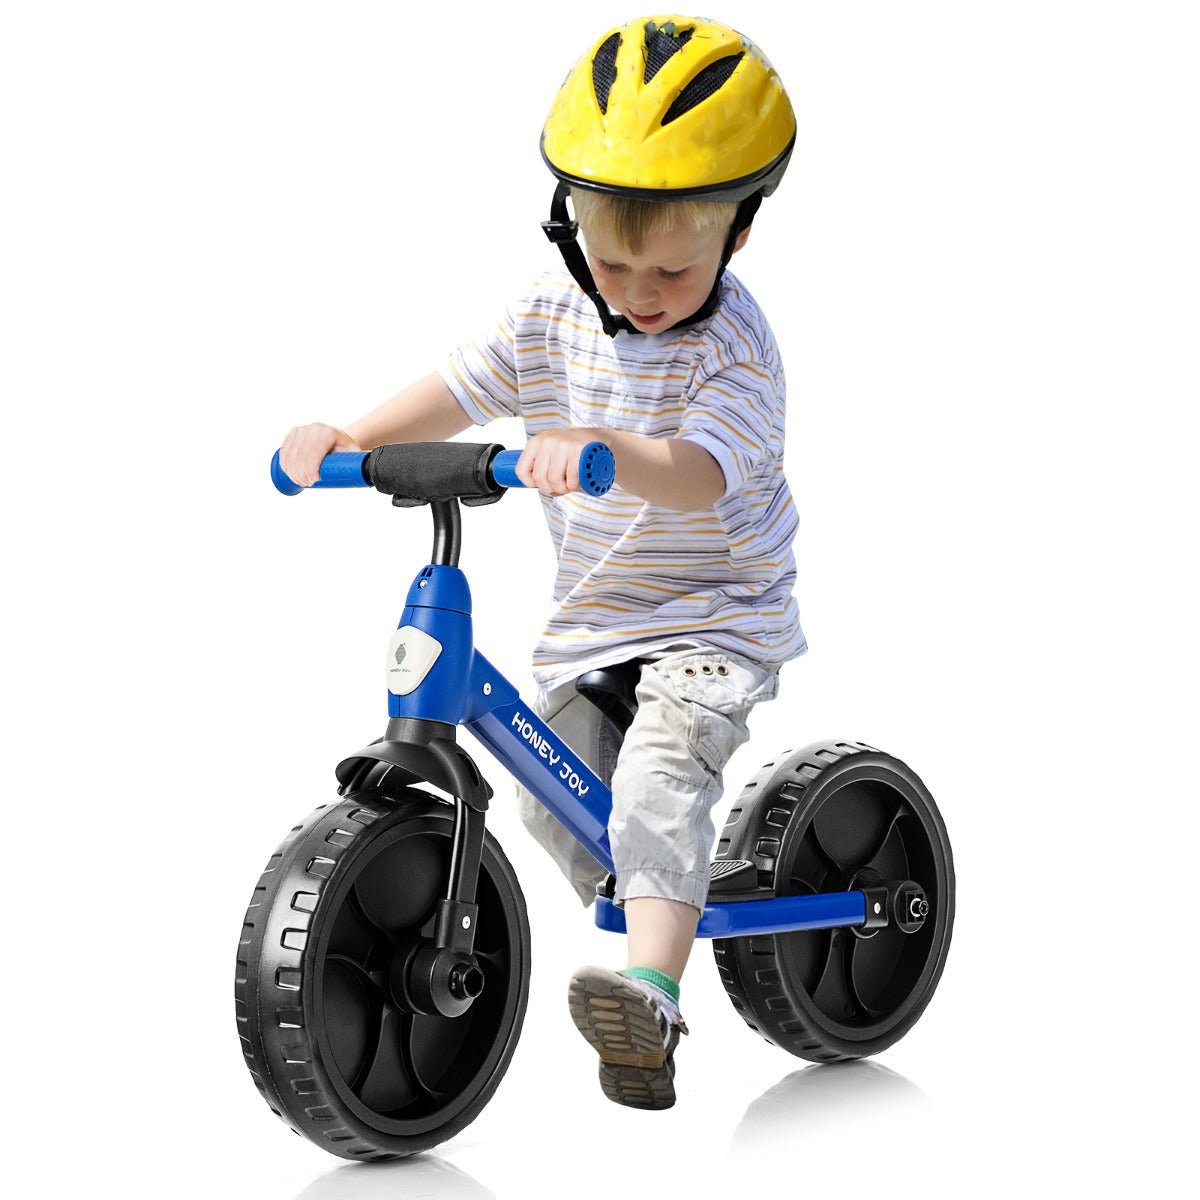 Pedal Play: 4-in-1 Kids Training Bike with Training Wheels Blue